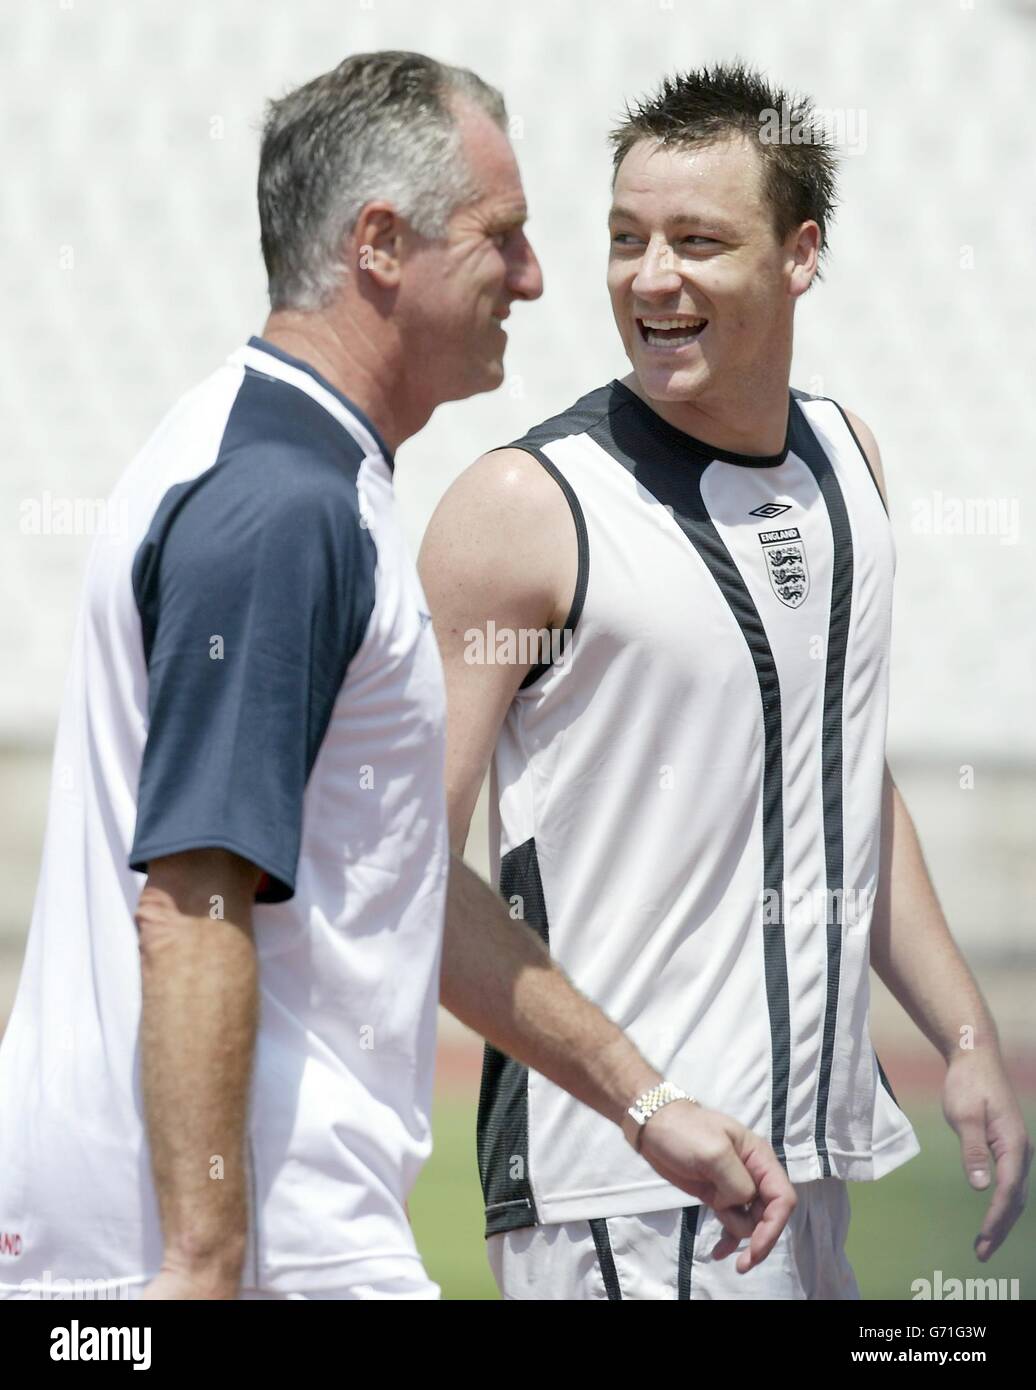 England defender John Terry walks off the pitch with coach Ray Clemence before an England training session at the National Stadium in Lisbon, in preparation for the opening Euro 2004 match against France this Sunday. , NO MOBILE PHONE OR PDA USE. INTERNET USE ONLY ON UEFA AUTHORISED SITES. Stock Photo